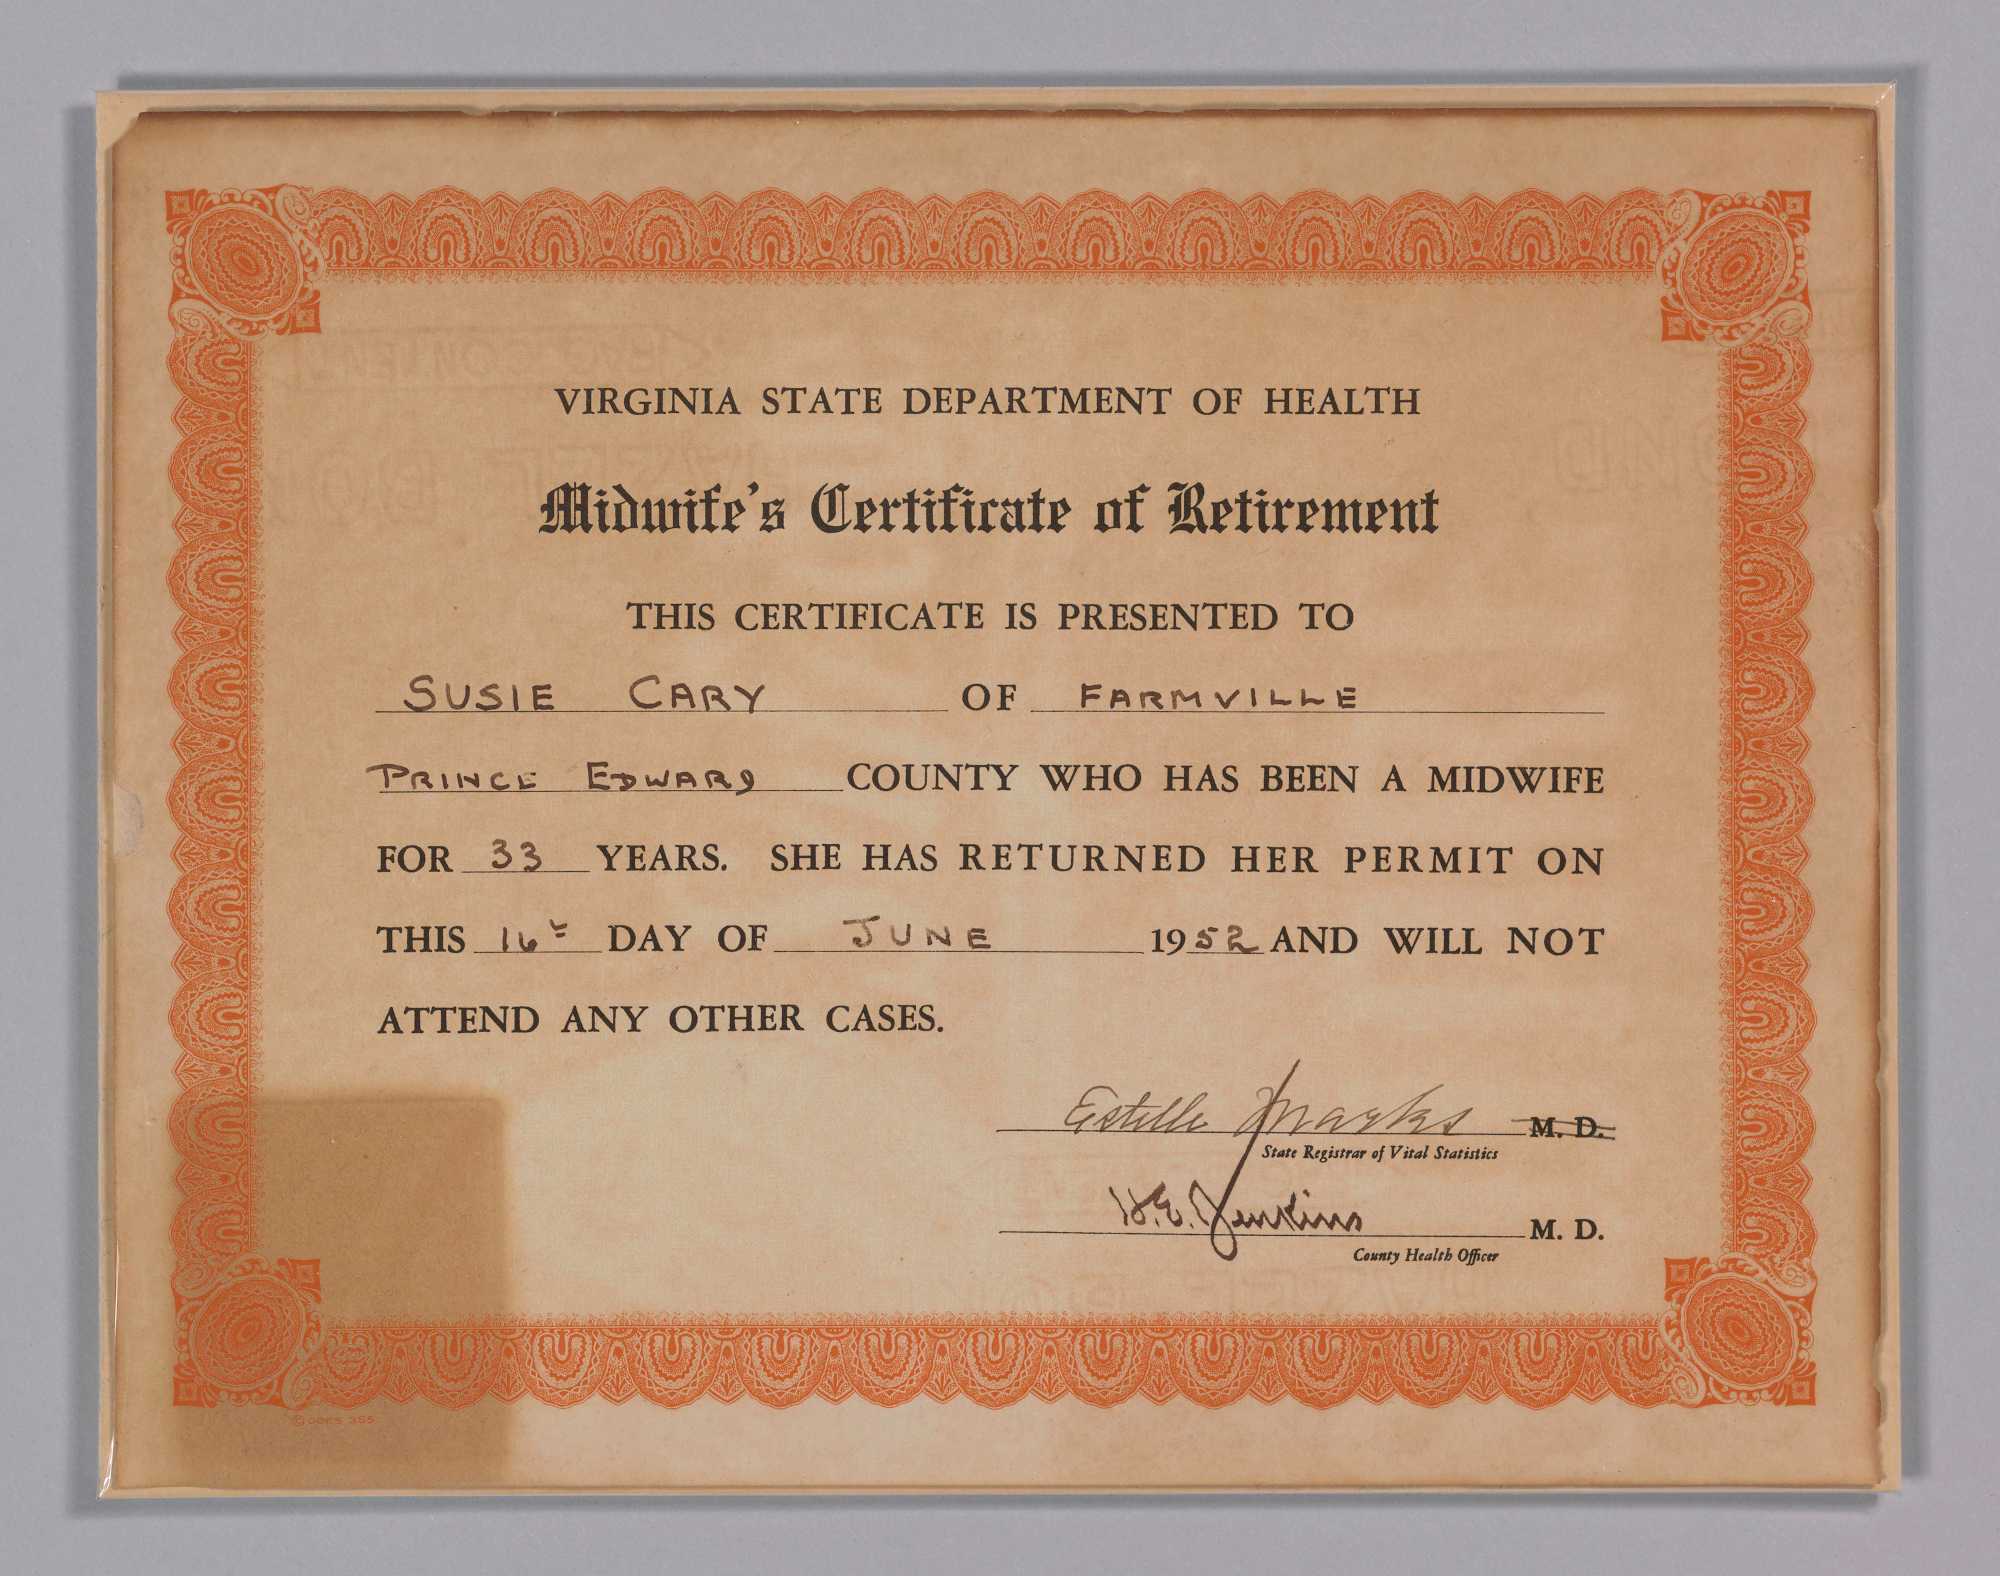 A paper "Midwife's Certificate of Retirement" issued by the Virginia State Department of Health to Susie Carey.